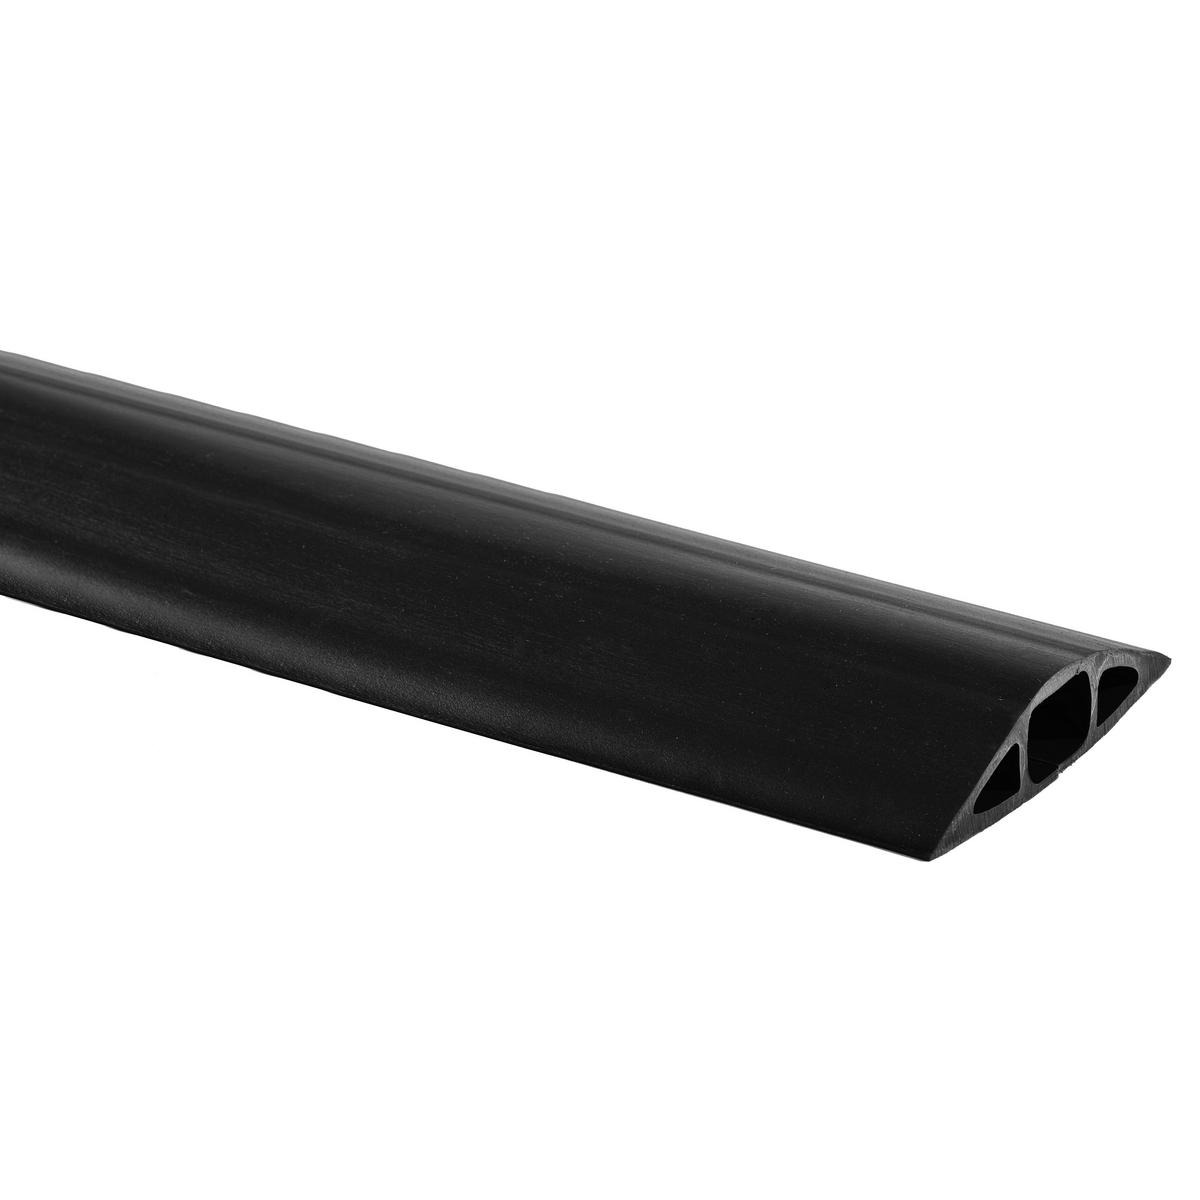 Hubbell BRYFT4BK25 FloorTrak Flexible Non-Metallic Cover for Cables, Size 4, Black, 25' 